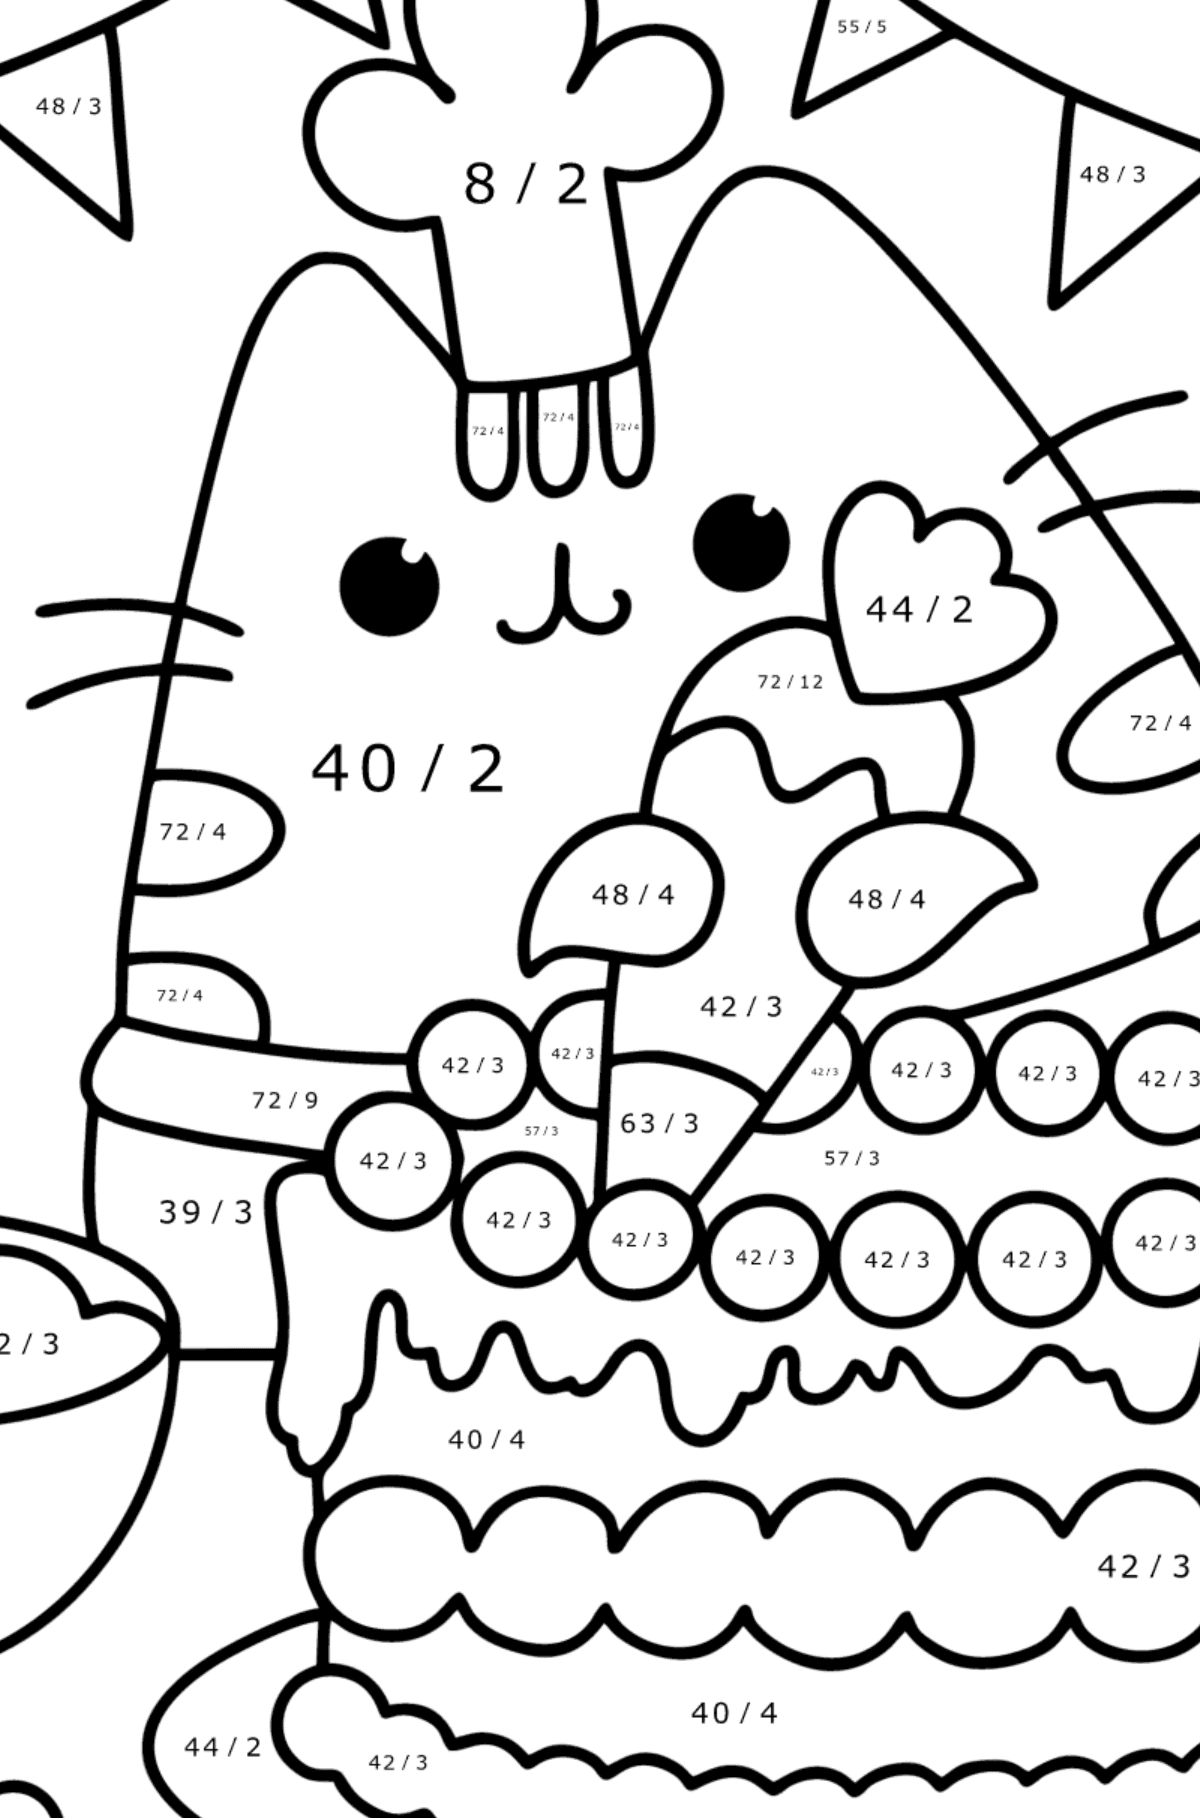 Pusheen birthday сolouring page - Math Coloring - Division for Kids